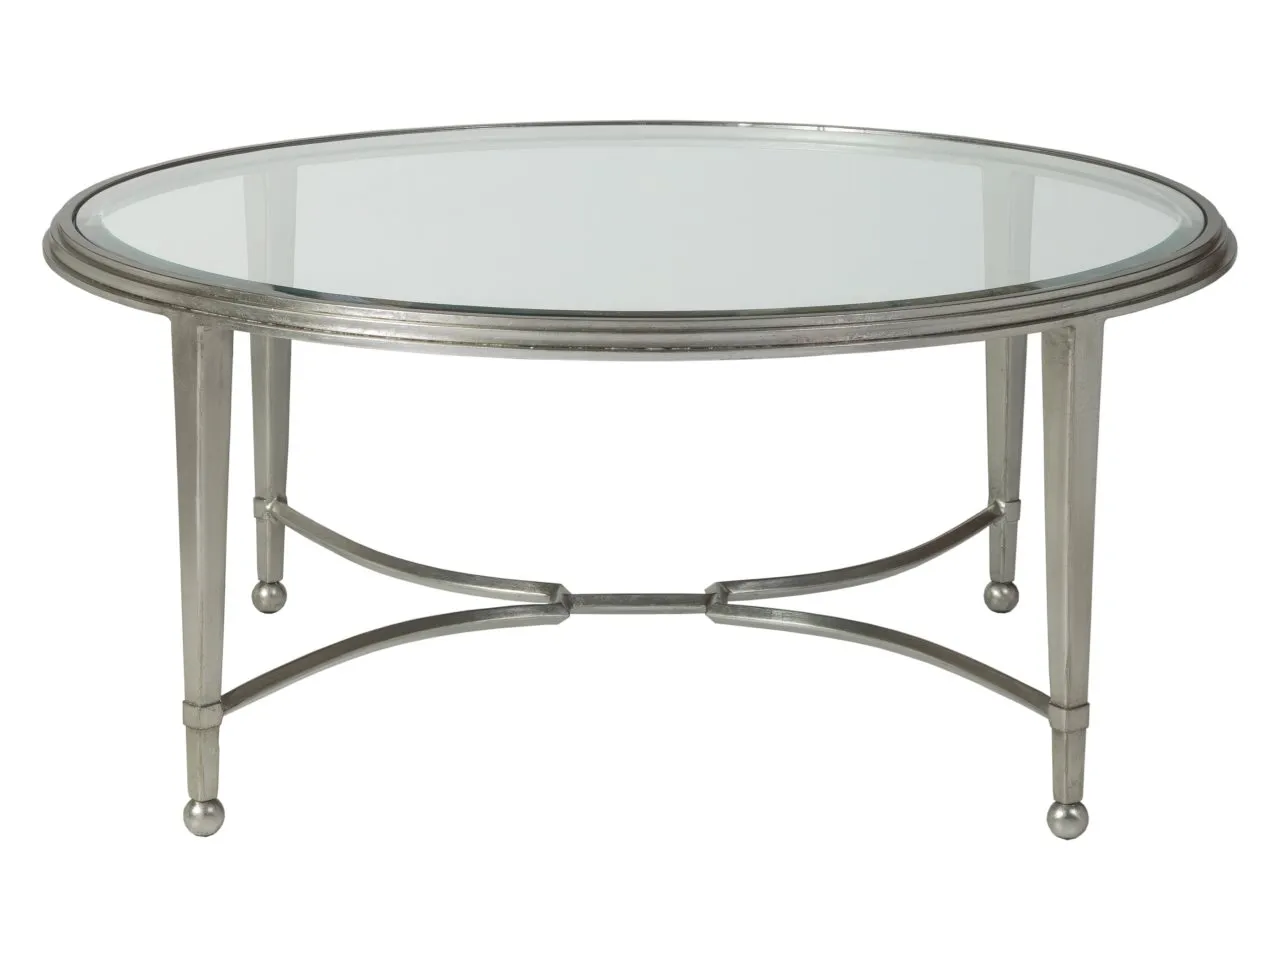 SANGIOVESE ROUND COCKTAIL TABLE METAL DESIGNS